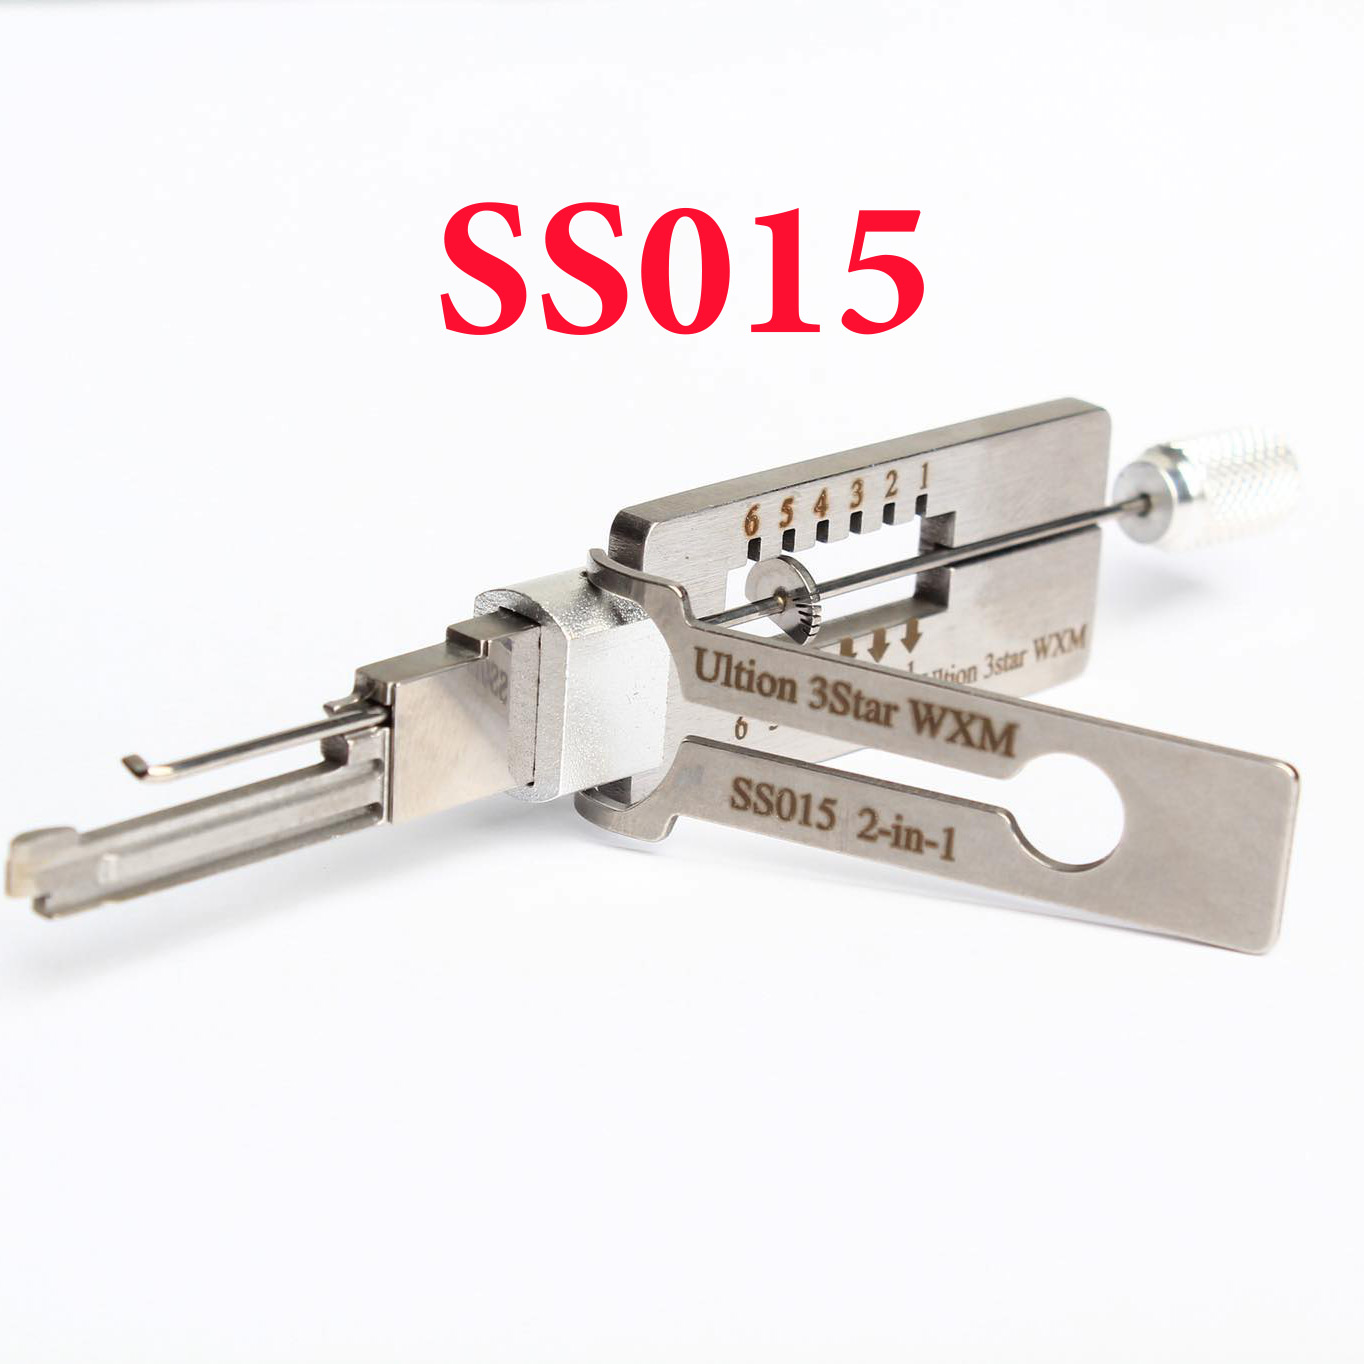 for Brisant Ultion WXM SS015 2-in-1 Pick Locksmith Tool Work as Lishi